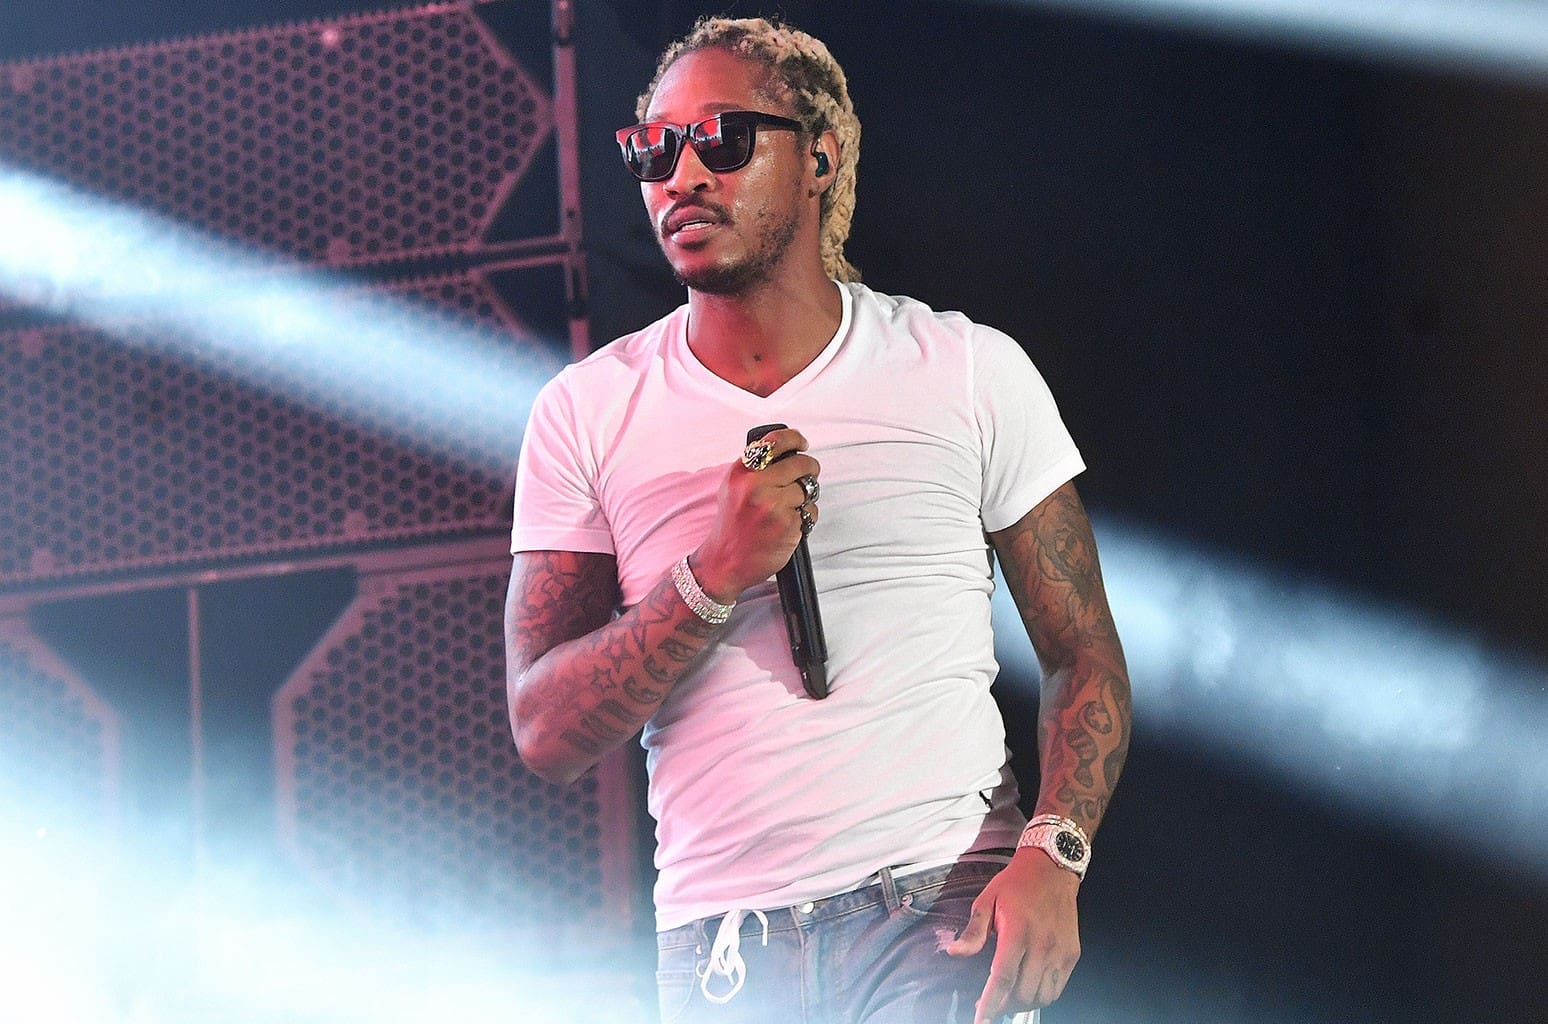 future-hosted-a-benefit-concert-for-haiti